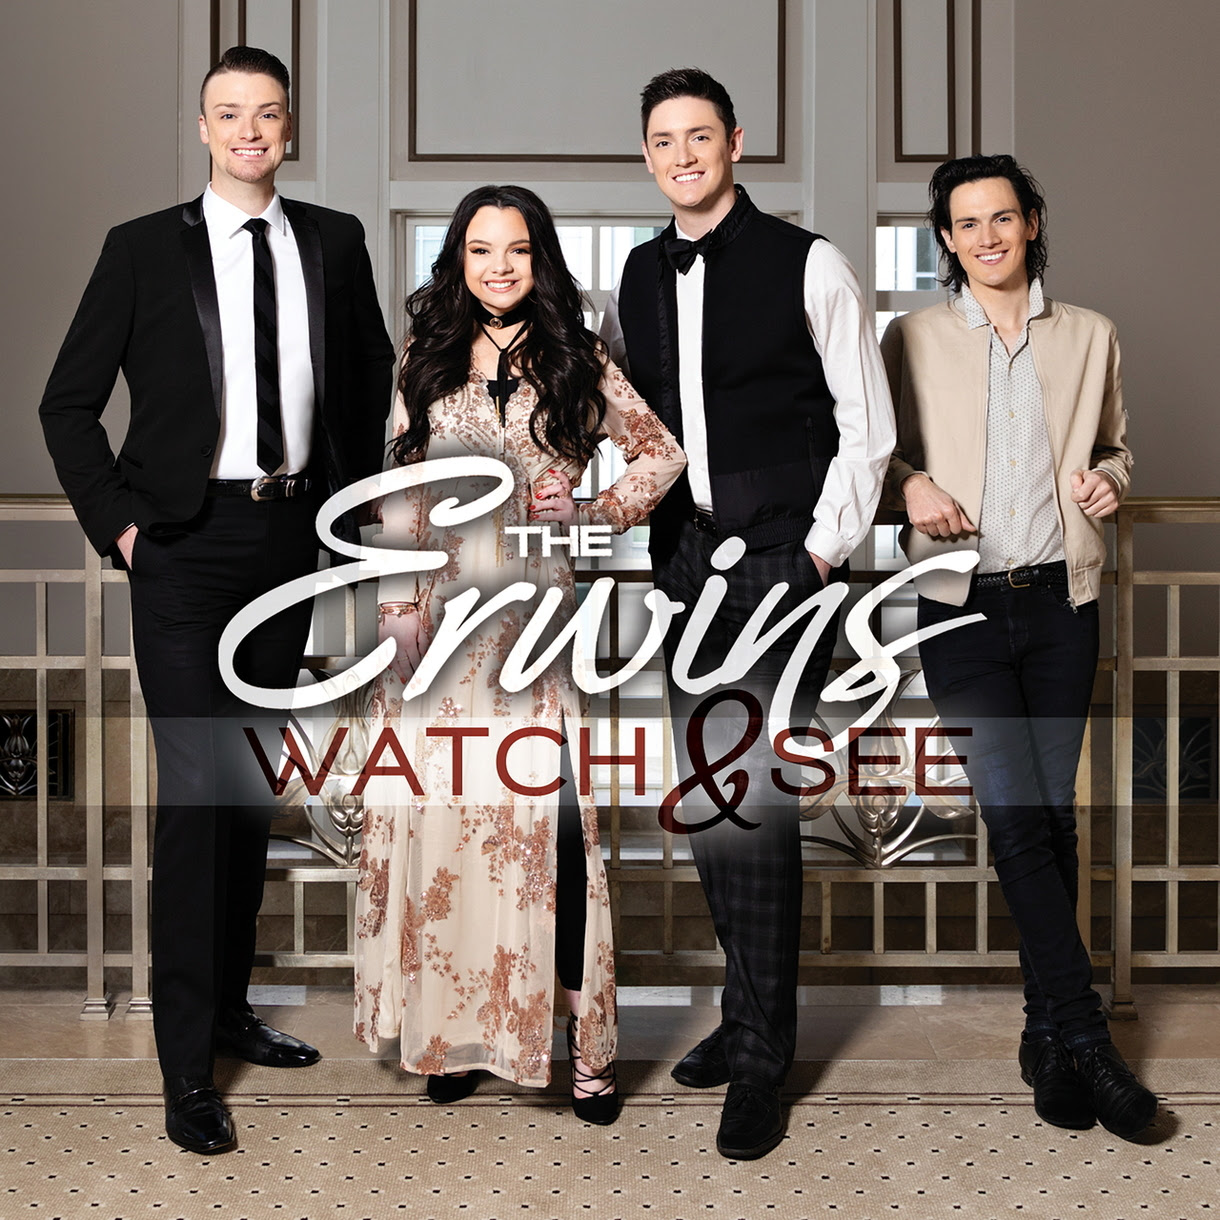 StowTown Records Announces Release of The Erwins' "Watch & See"